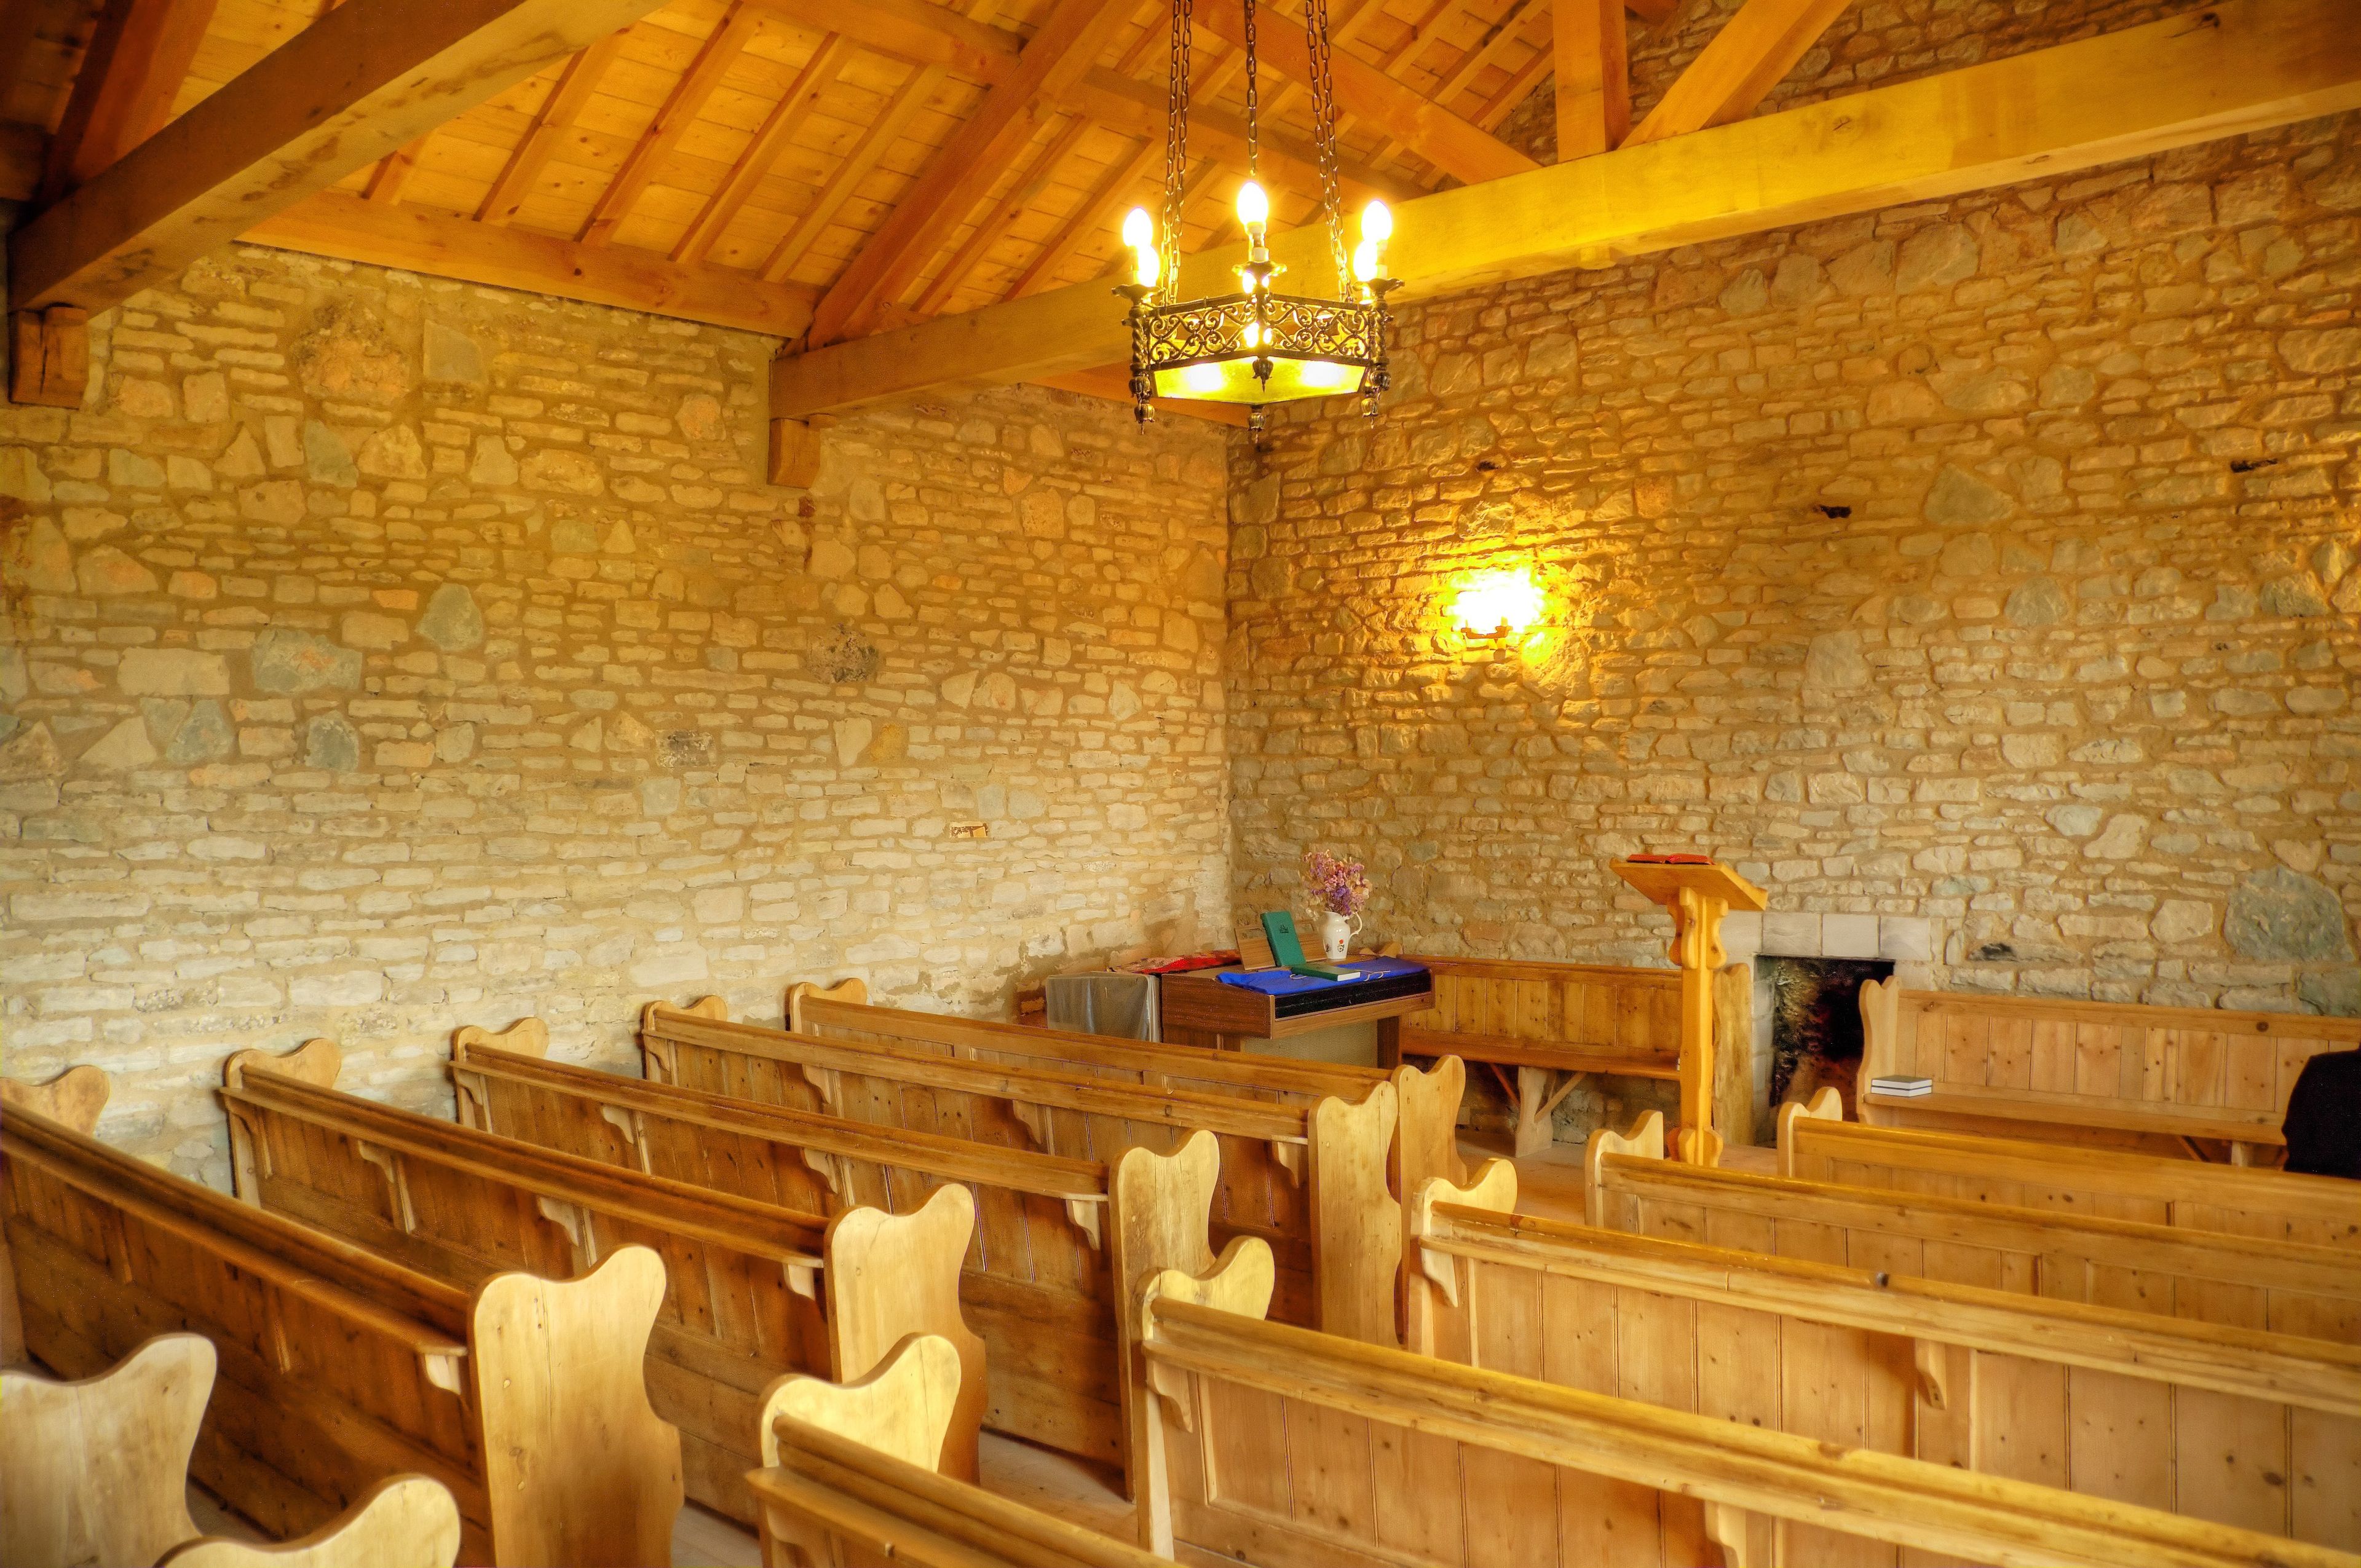 The interior of a chapel in Gadfield Elm, England.